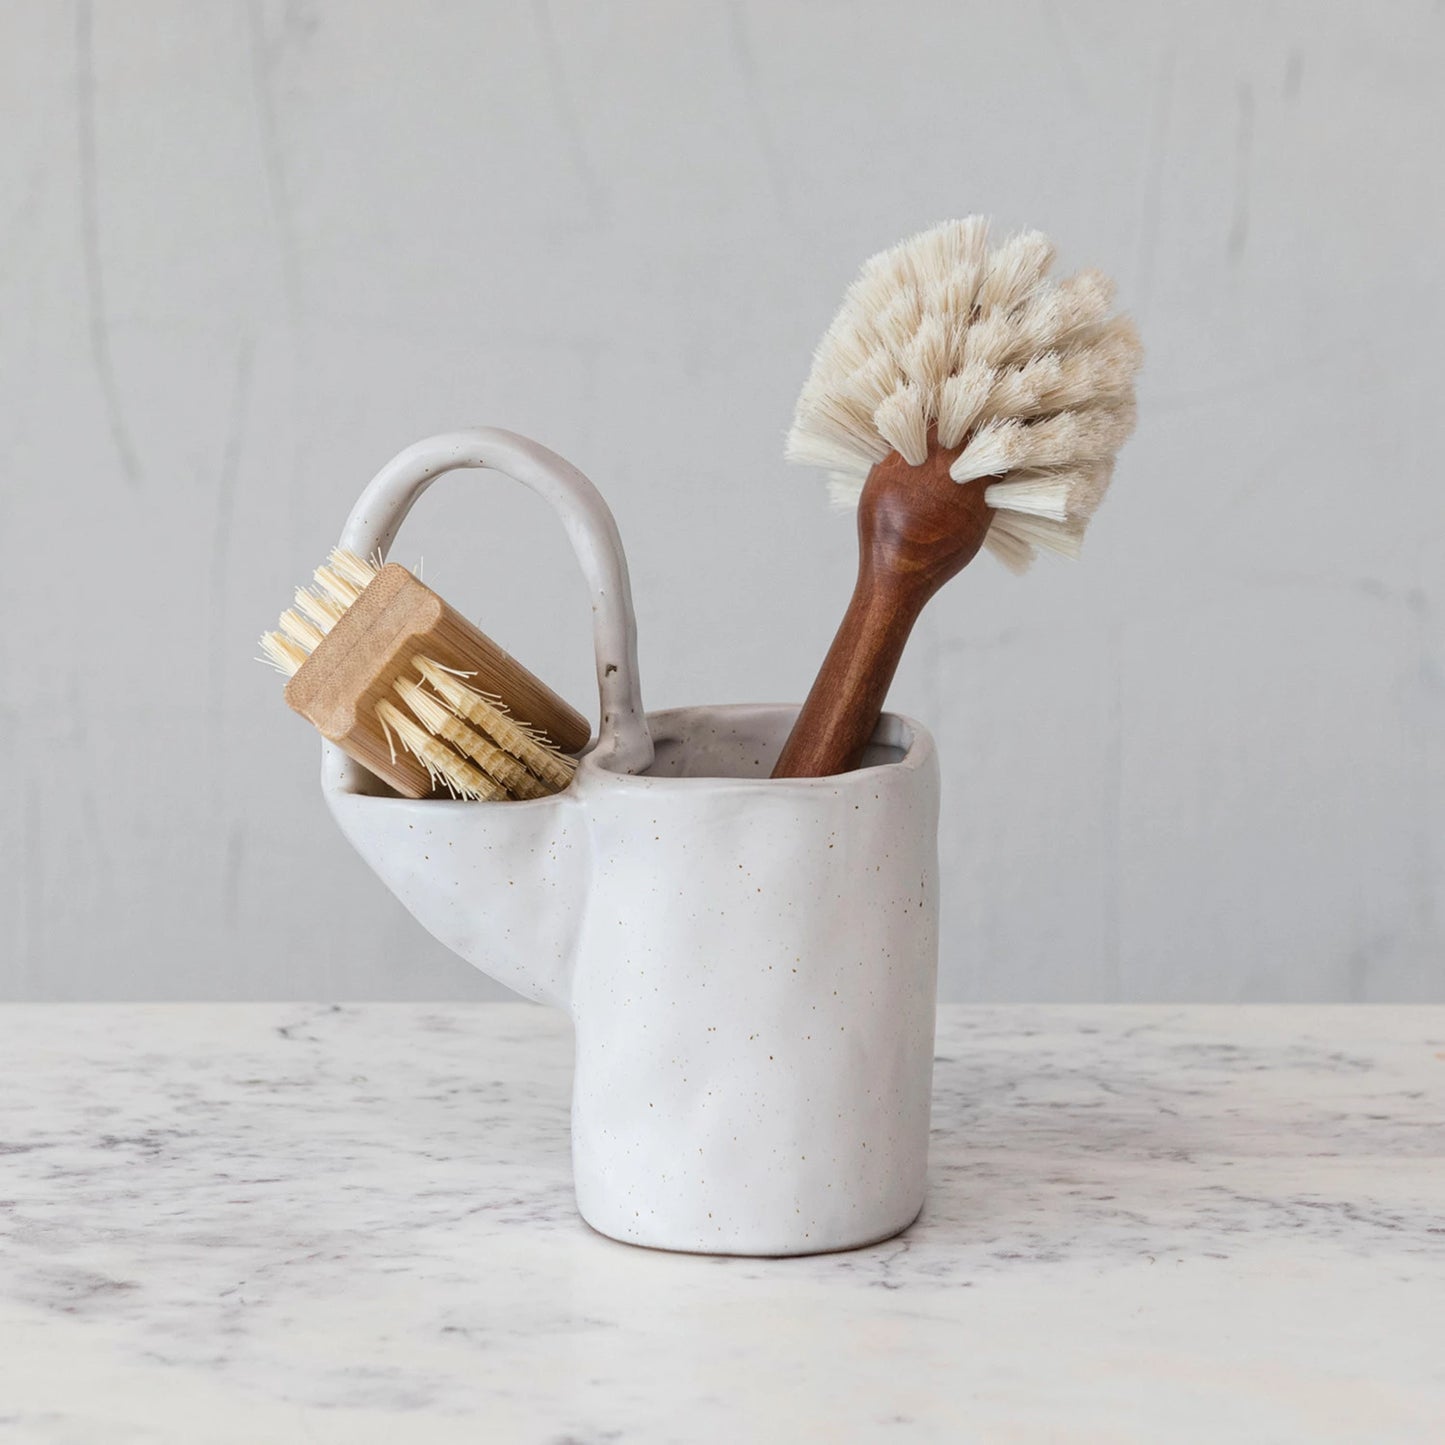 Sponge and Brush Holder with Handle